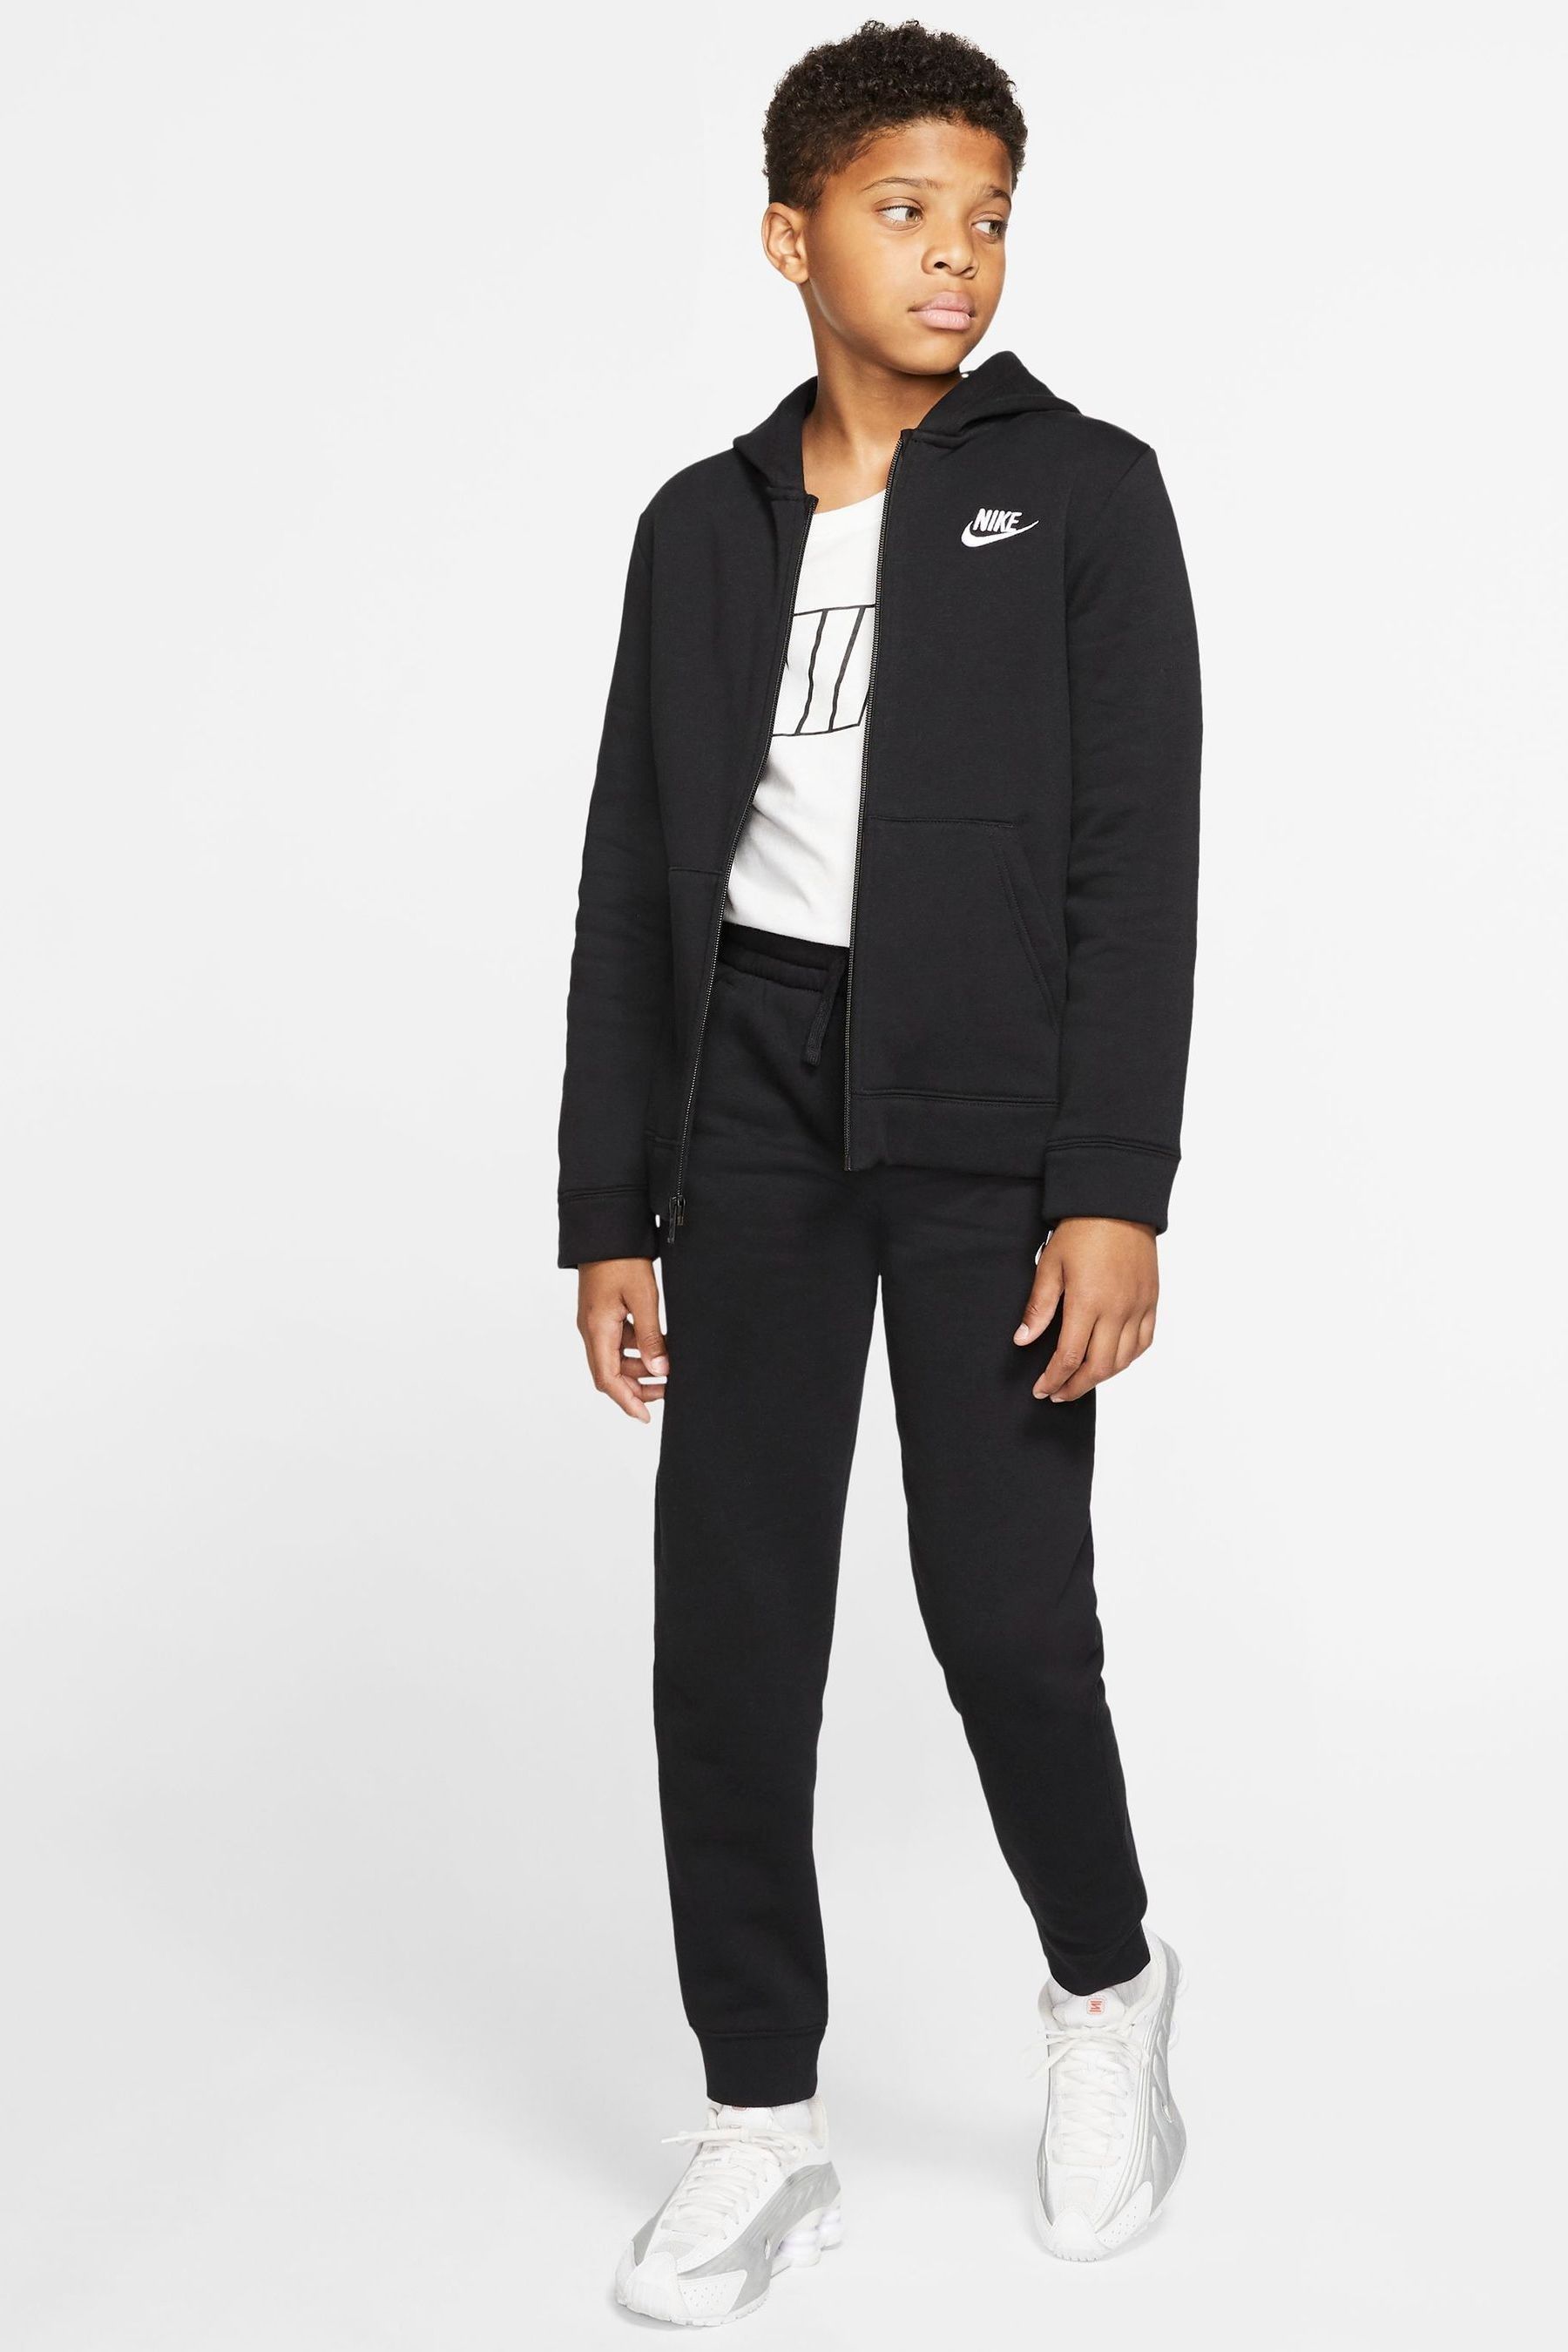 Buy Nike Black Club Fleece Tracksuit from the Next UK online shop